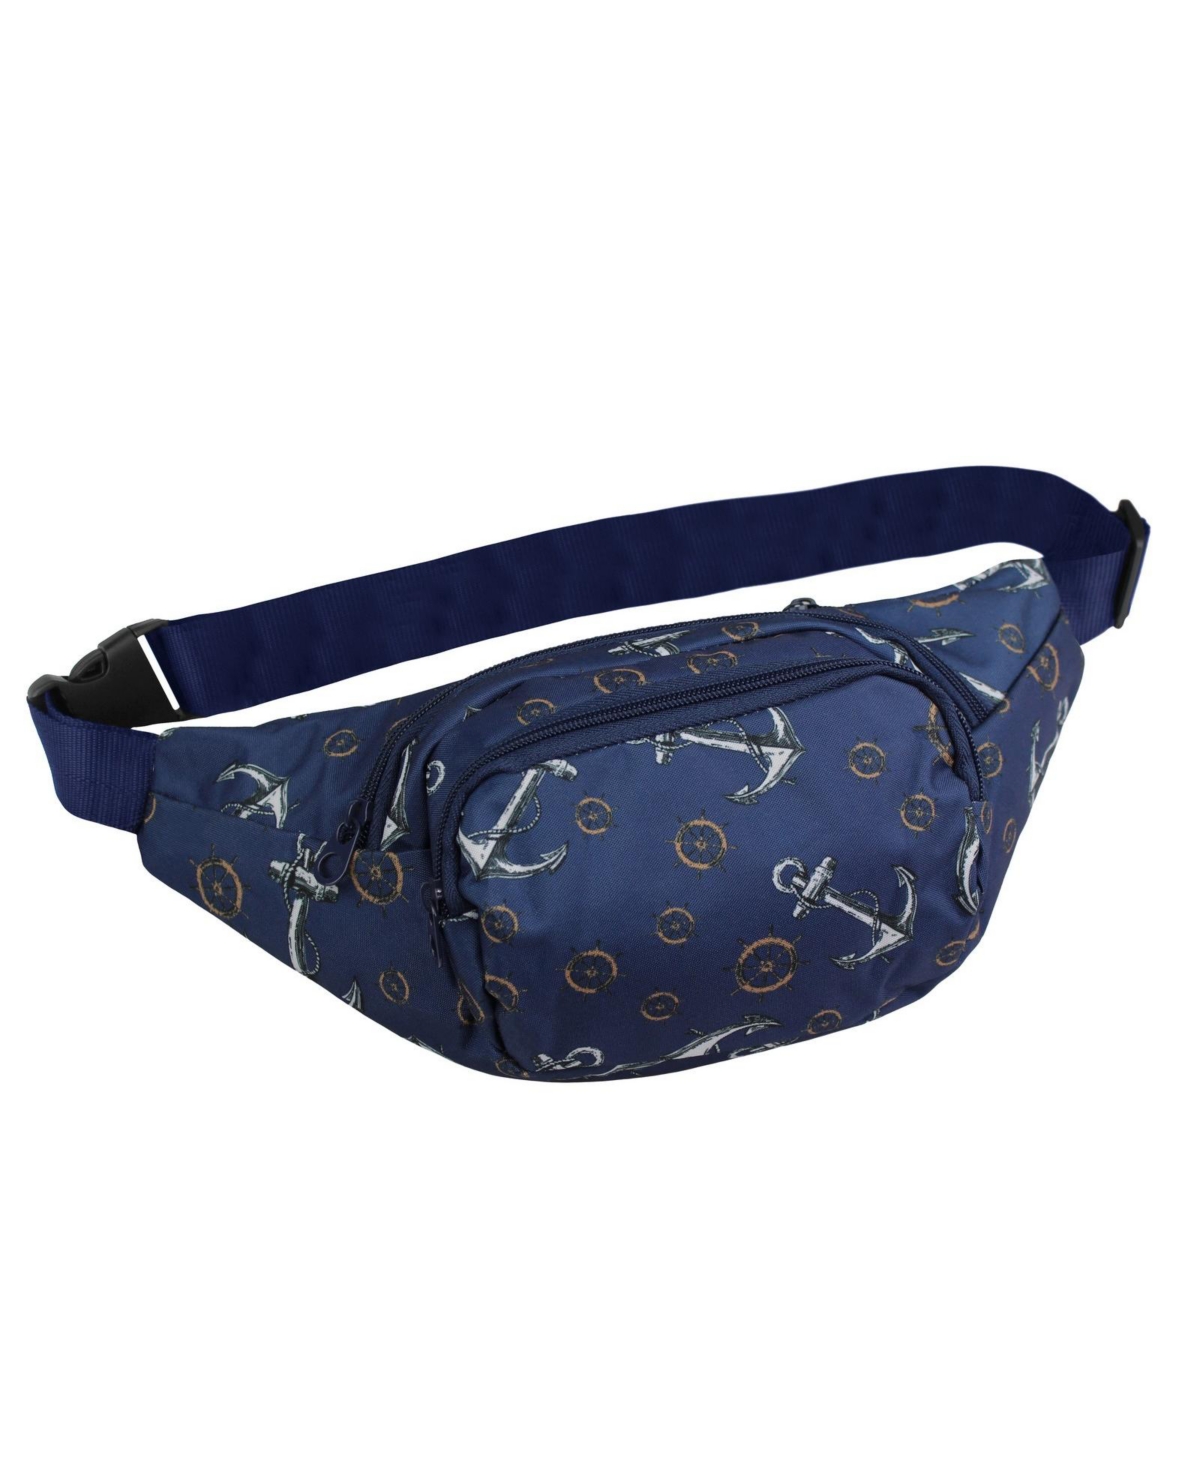 Anchor 14-Inch Fanny Pack Adjustable Crossbody Waist Pack - Anchor blue